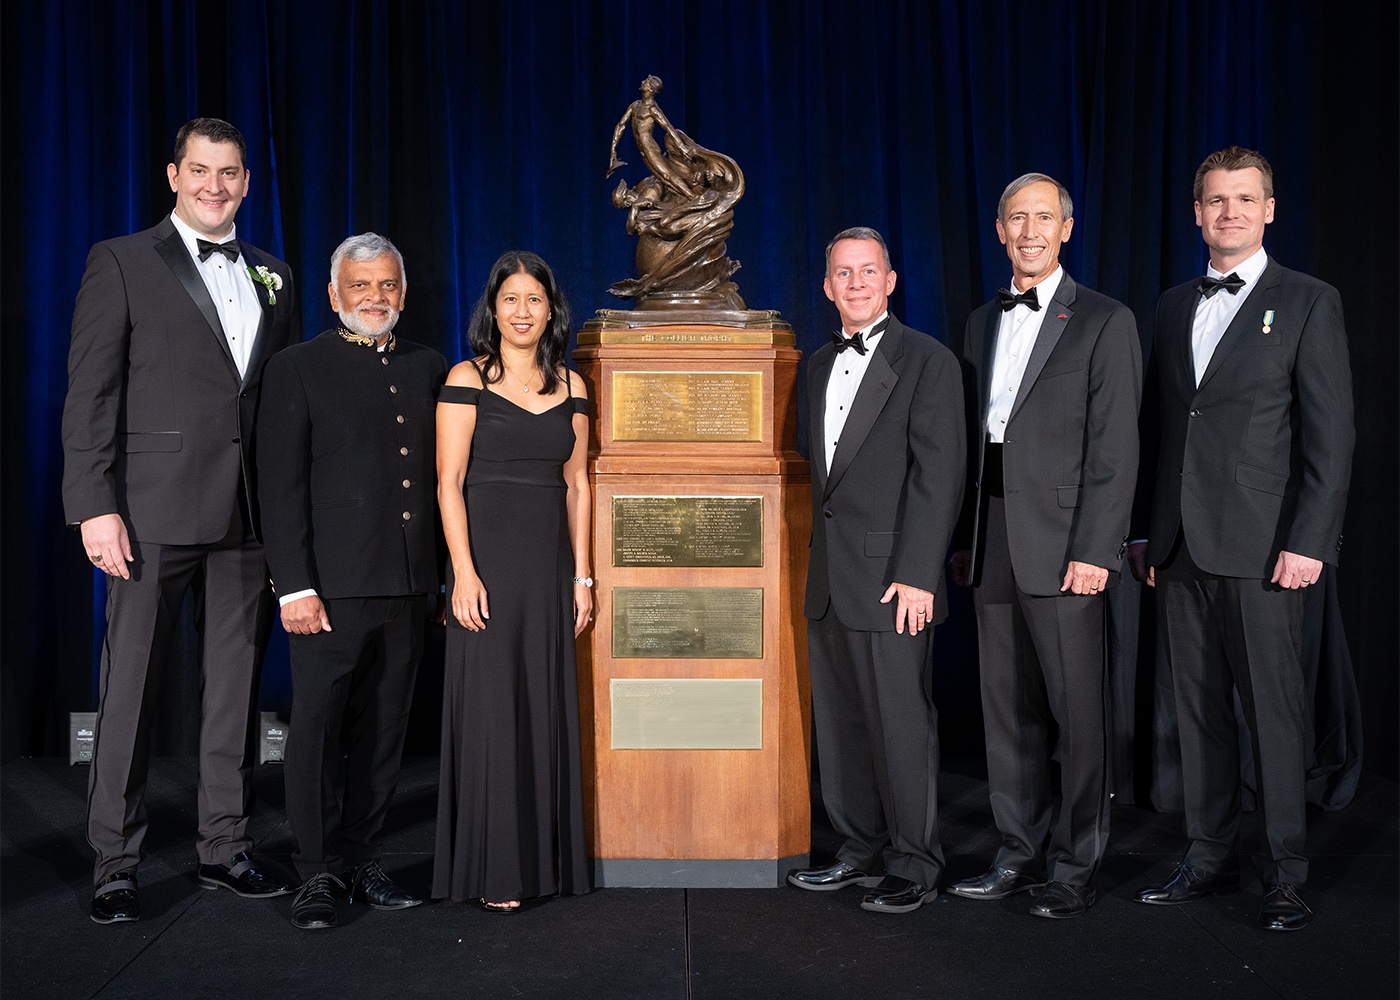 This image shows members of the Ingenuity Mars Helicopter team standing next to the NAA Collier Trophy on June 9, 2022.